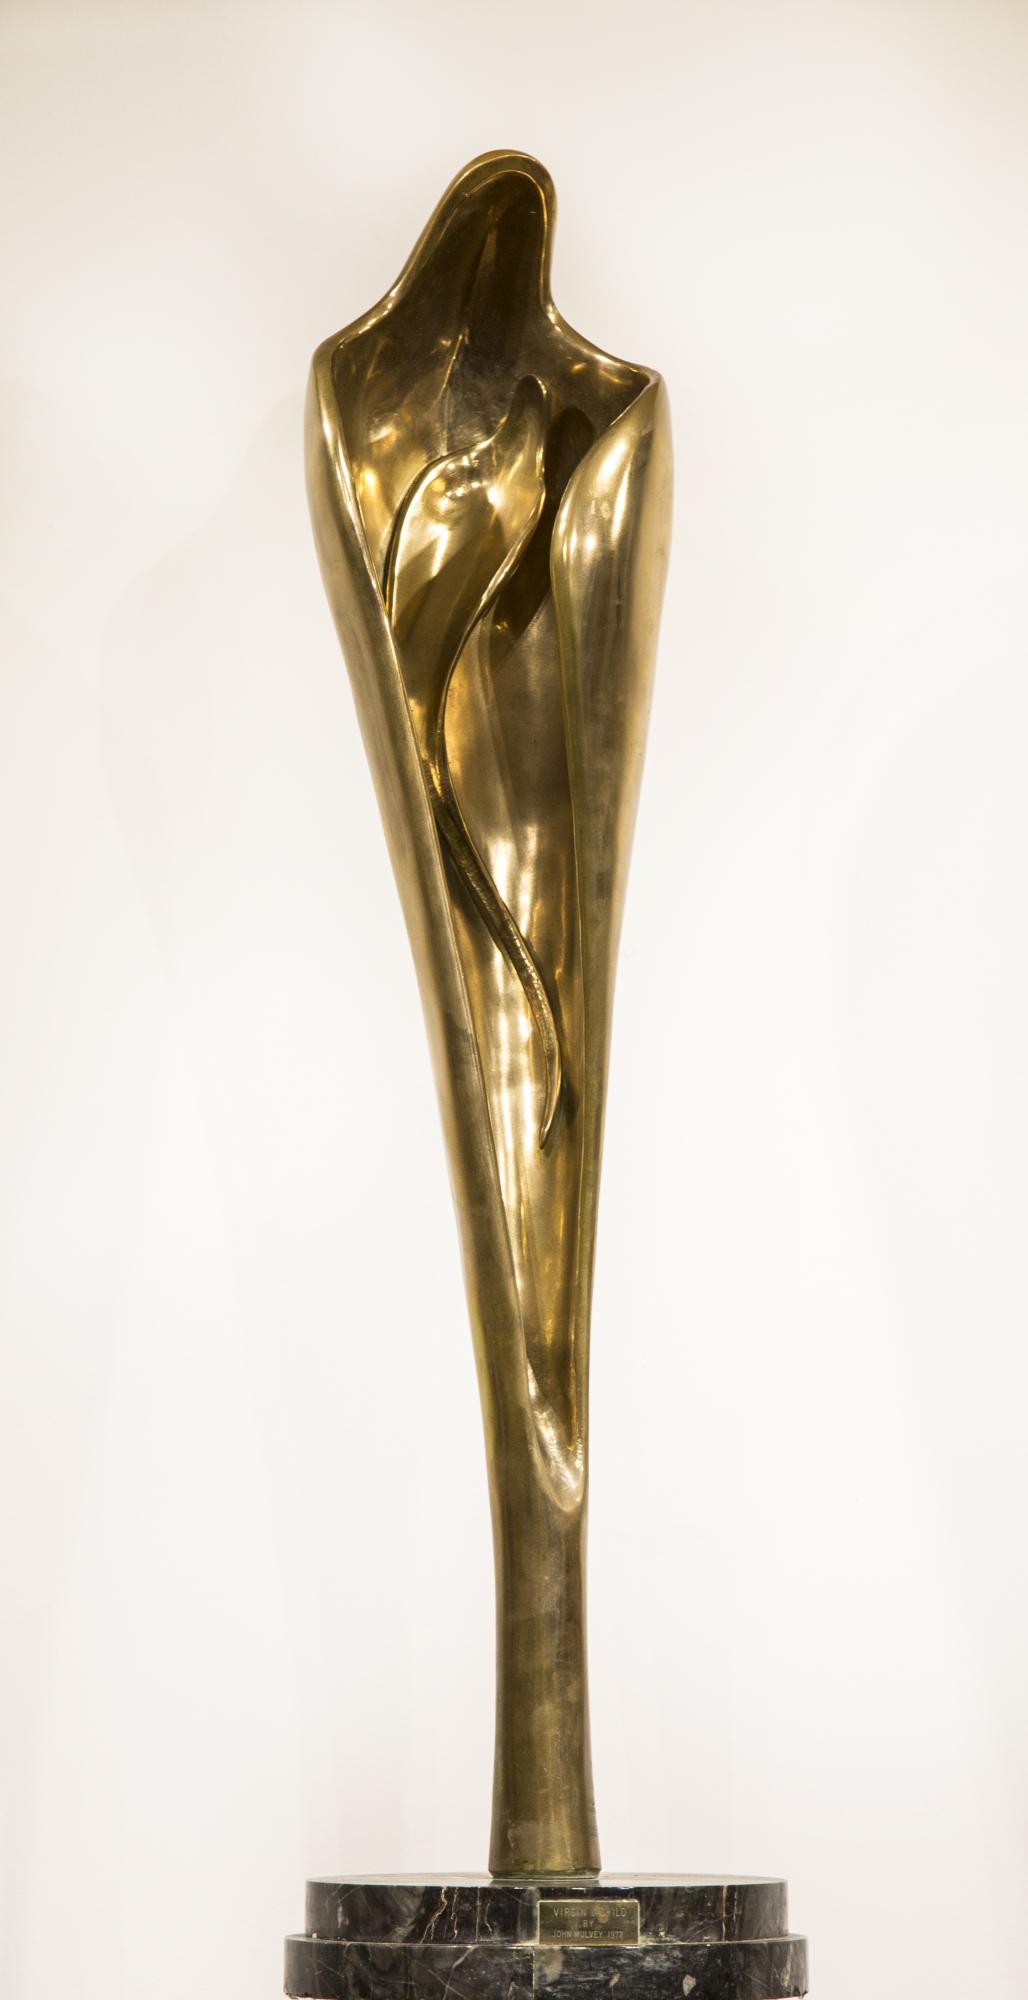 Sculpture: ▲ John Mulvey, Virgin and Child, Bronze with gold patina, Signed 3 of 5 and dated 1972,